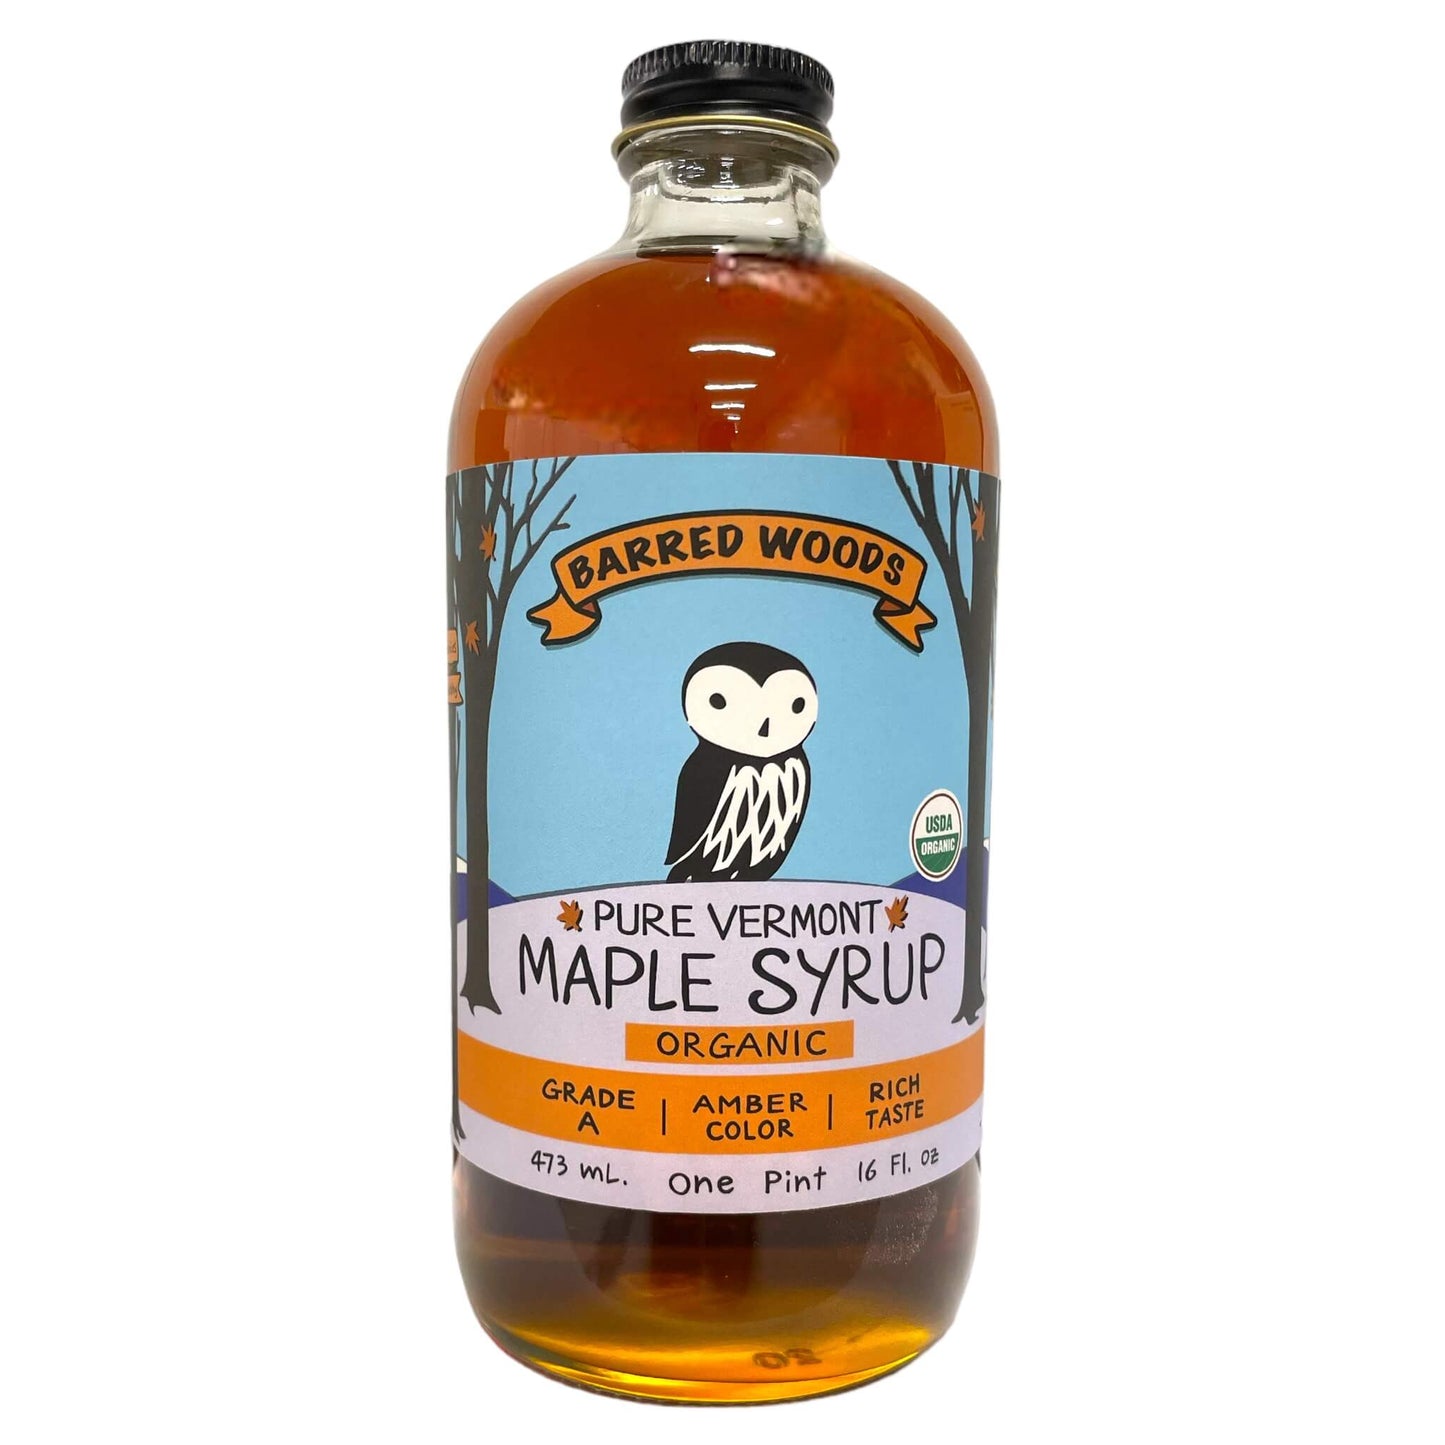 Bottle of Maple Syrup - One Pint Glass Bottle of Organic Maple